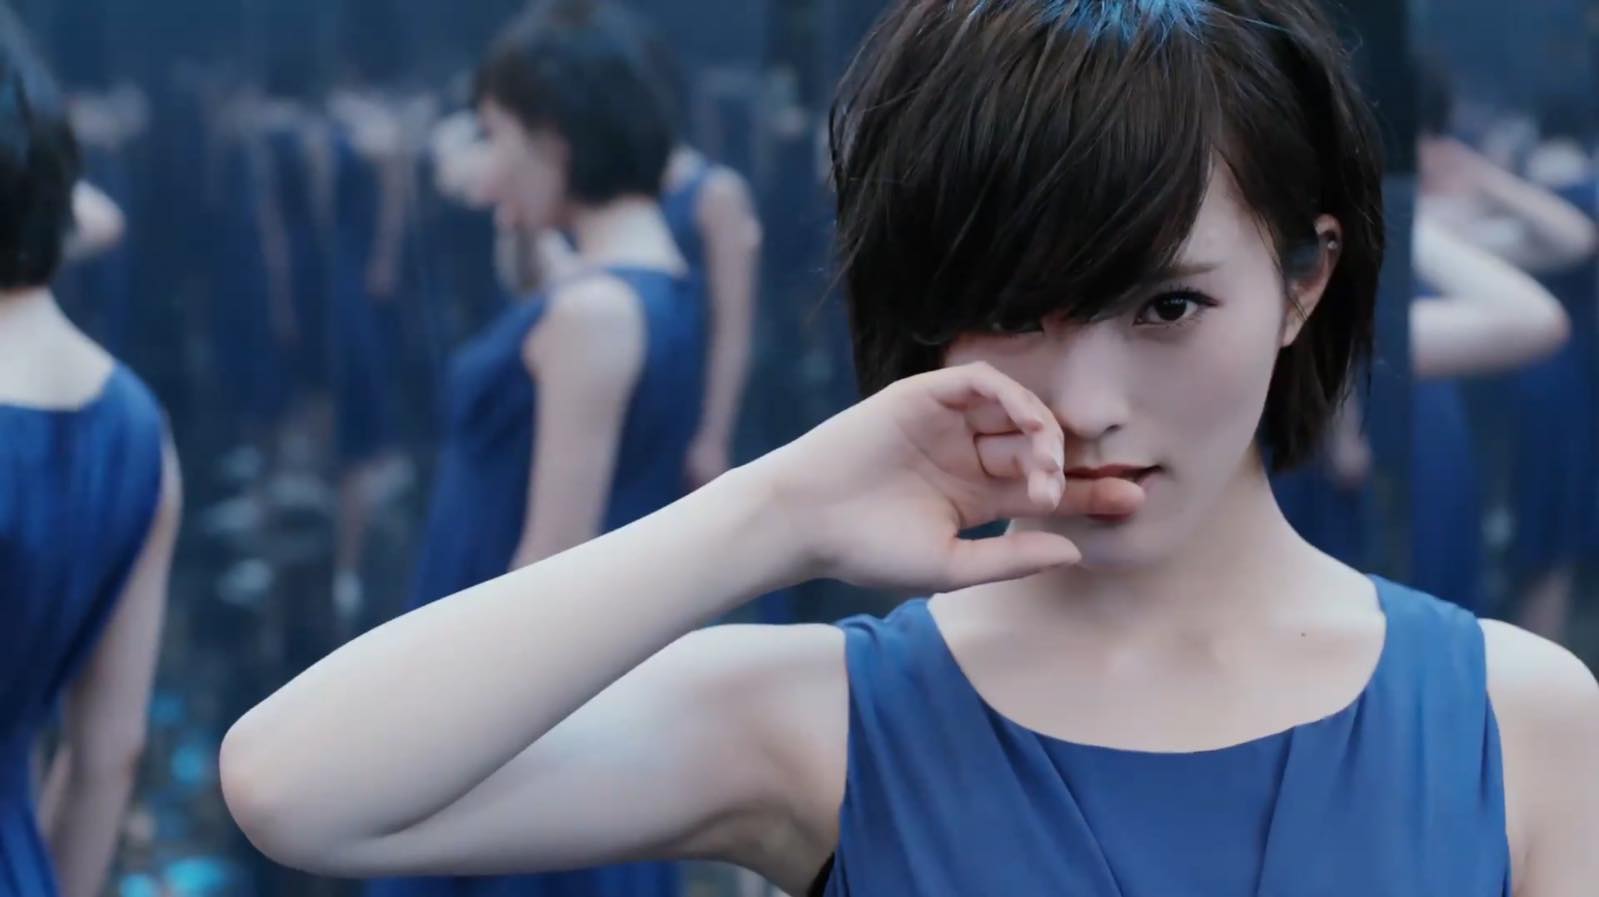 Oral Fixations and Serial Breakups in NMB48’s MVs for “Amagami Hime” and “Ferry”!